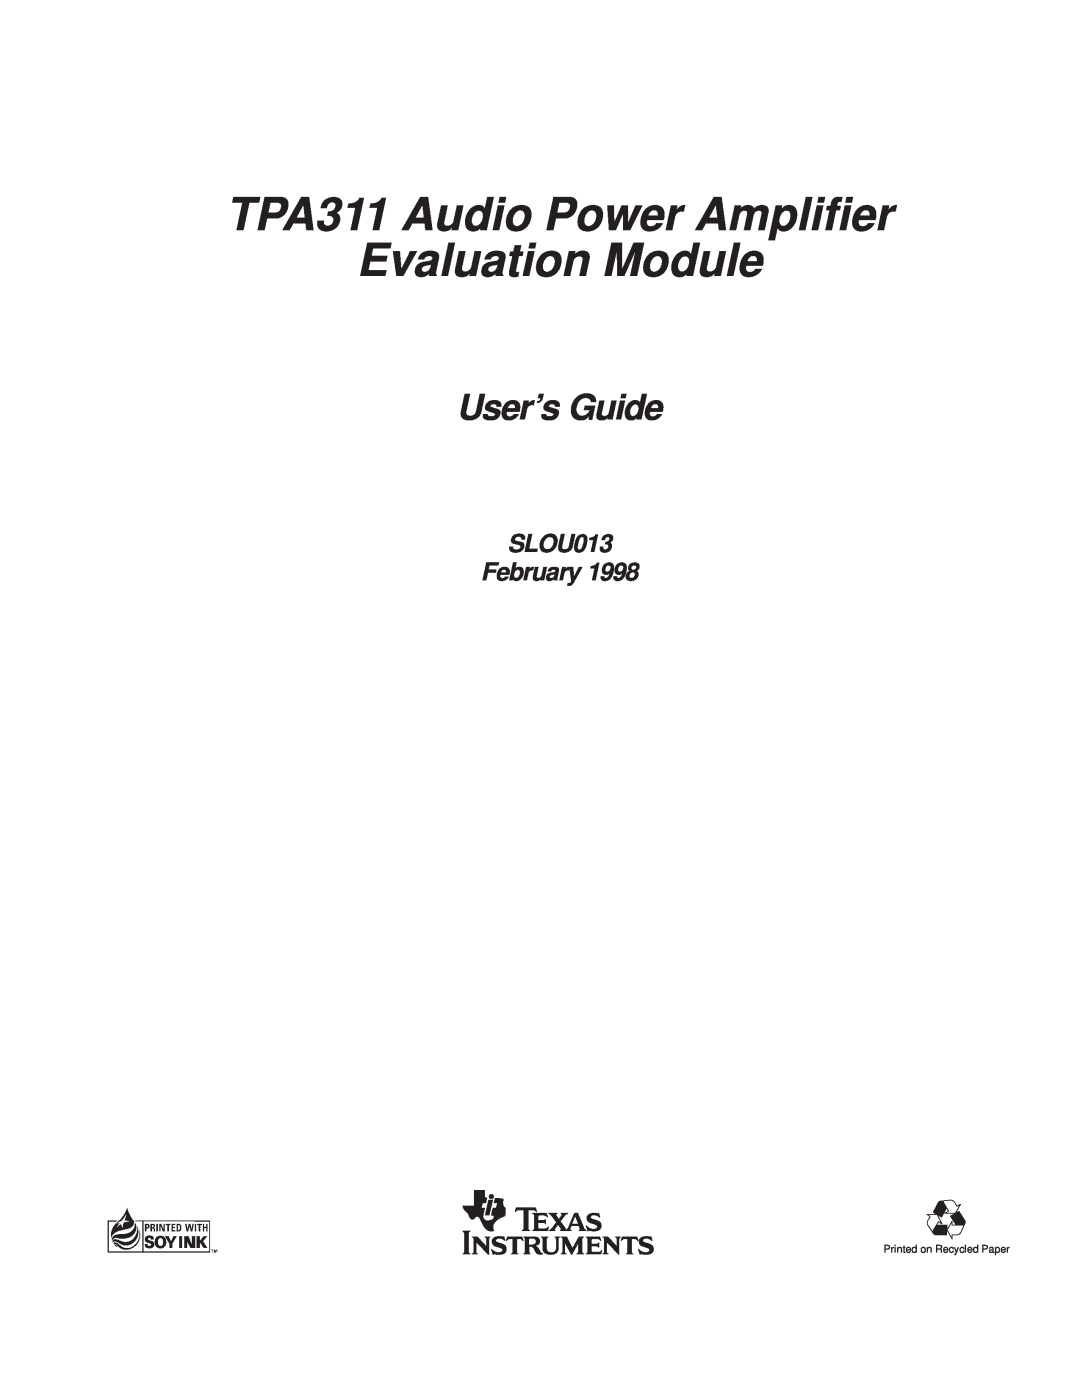 Texas Instruments TPA 311 manual TPA311 Audio Power Amplifier Evaluation Module, Users Guide, SLOU013 February 